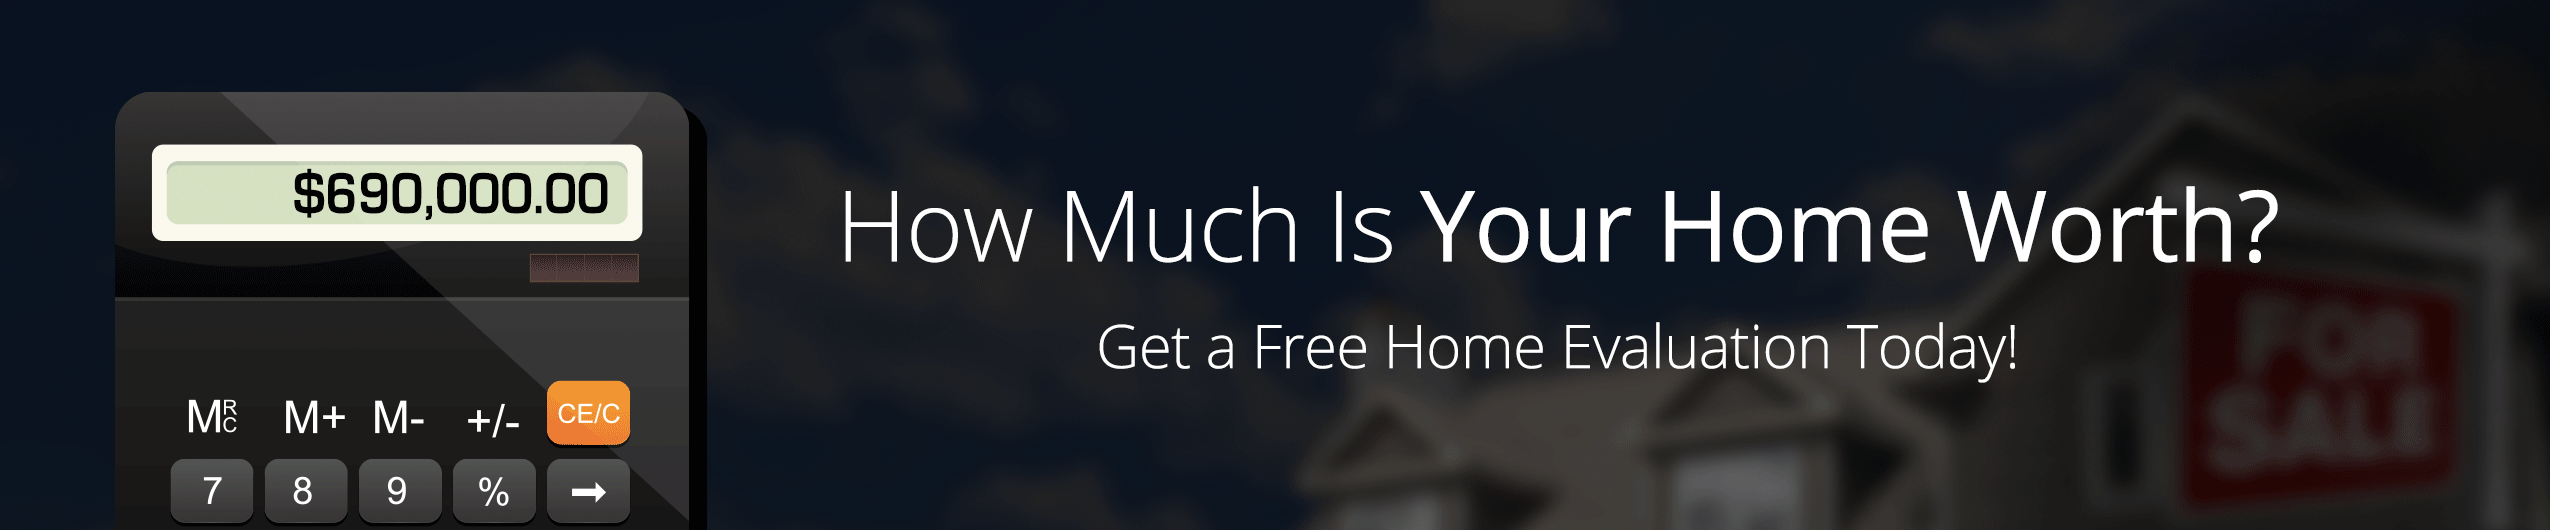 FREE Home Evaluations